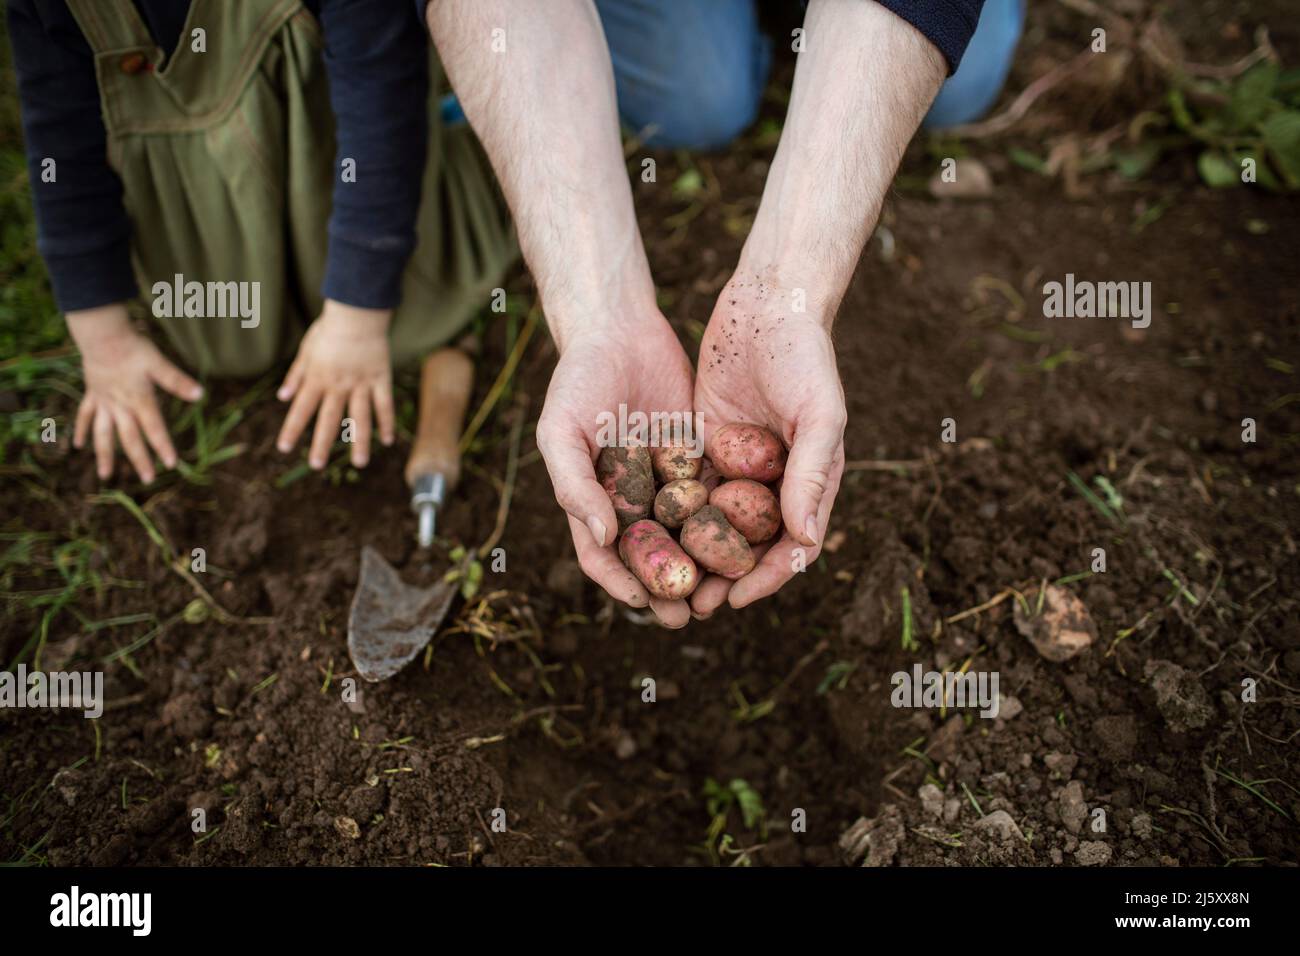 Close up hands cupping fresh harvested fingerling potatoes Stock Photo